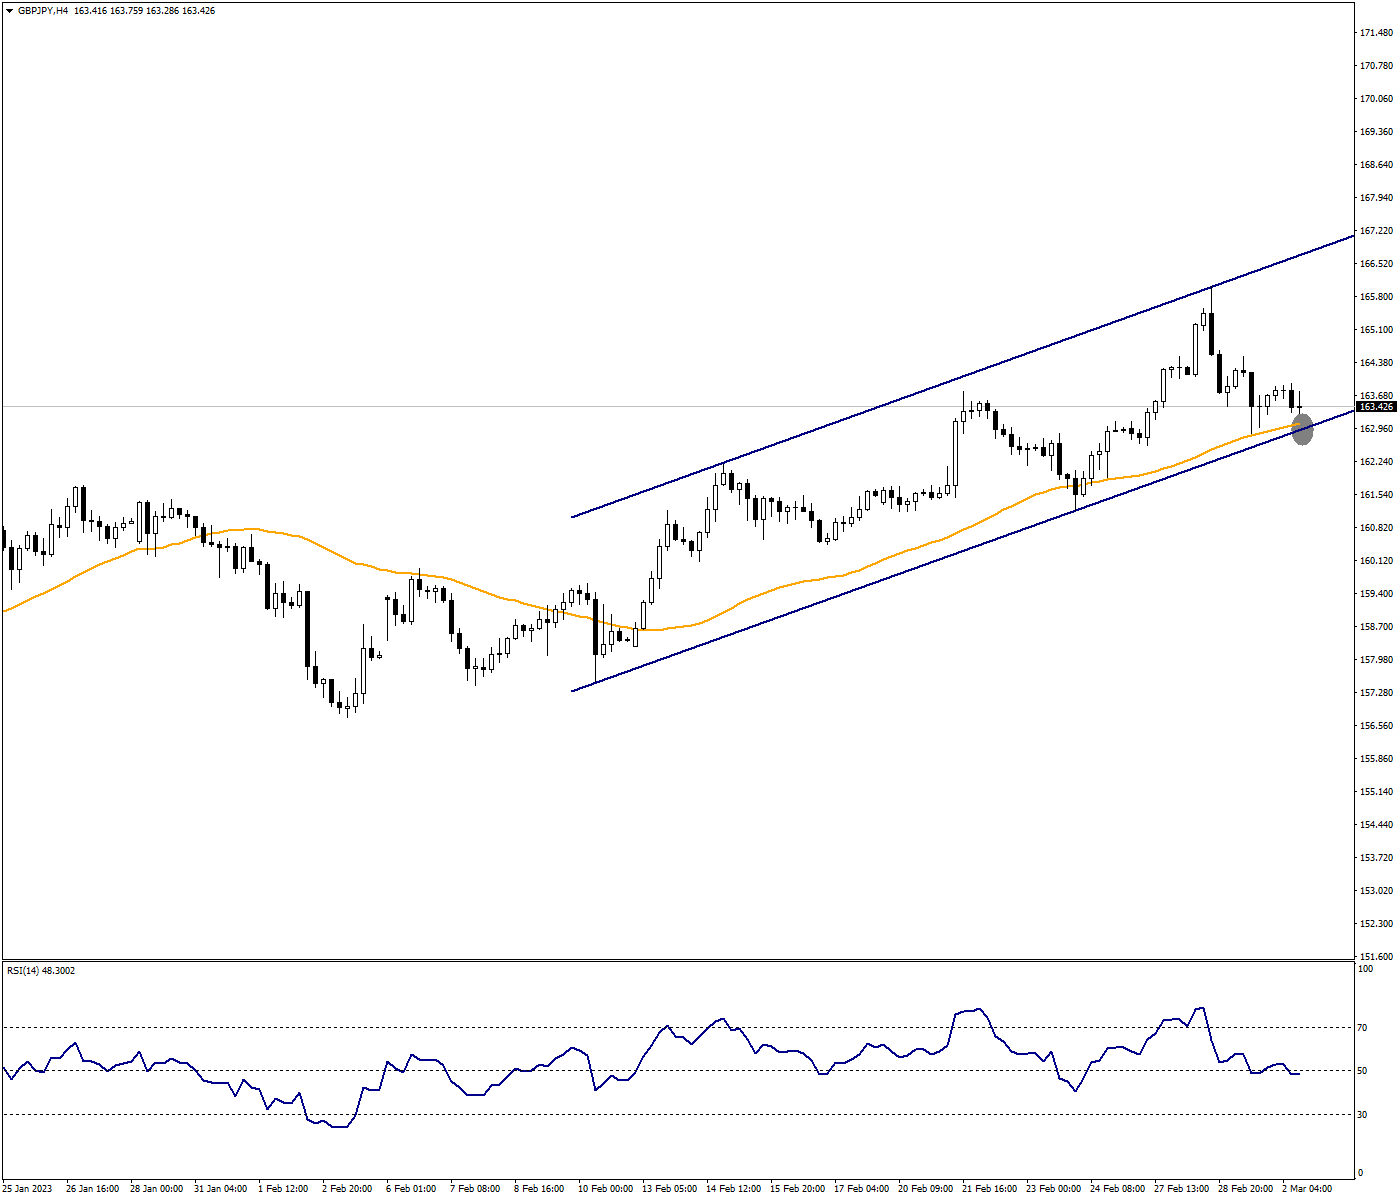 GBPJPY Tries to Protect the Rising Channel